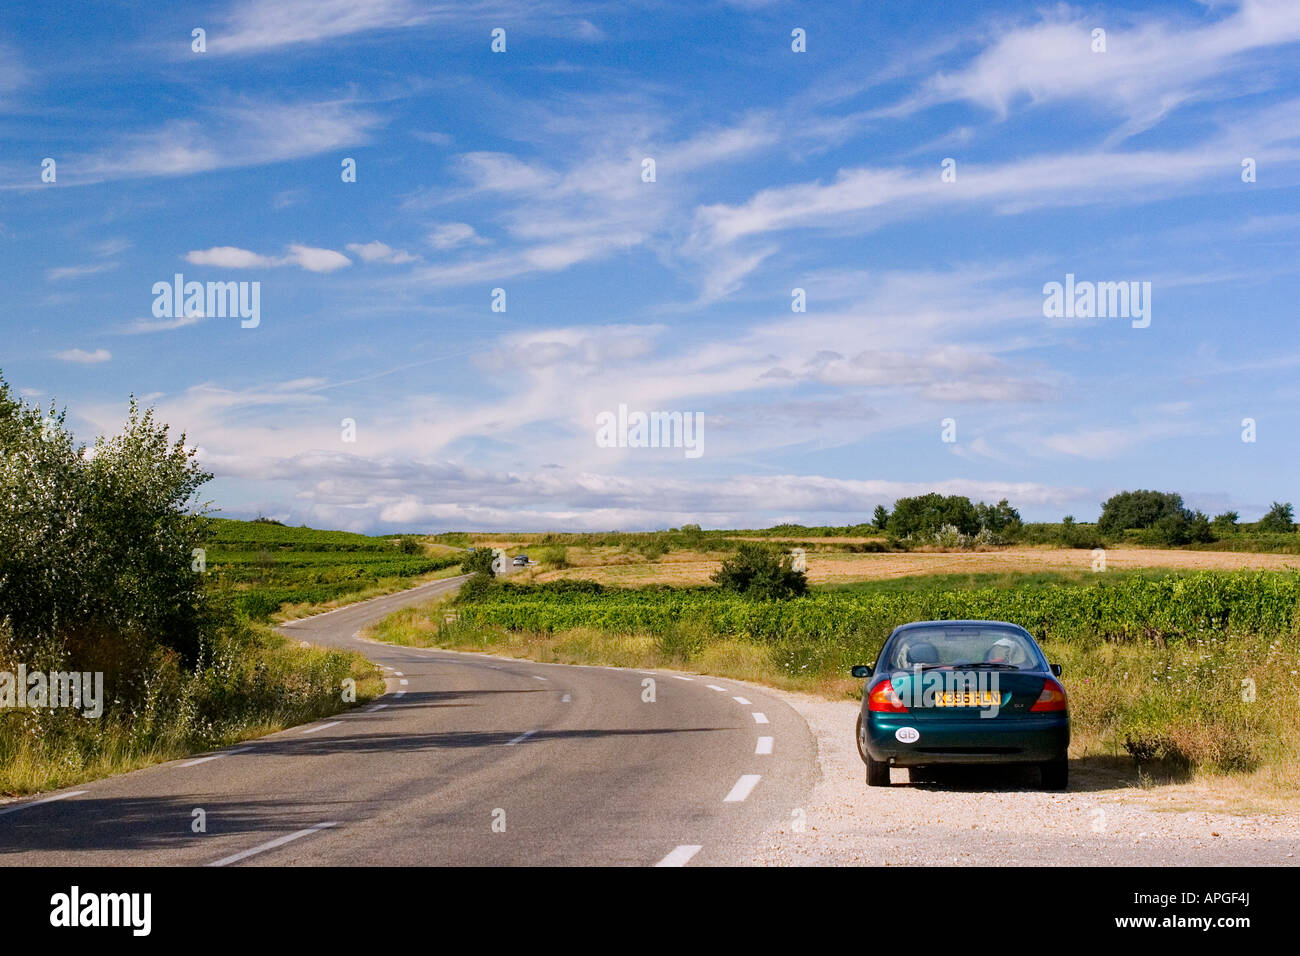 A British car parked on a road in Provence, France Stock Photo